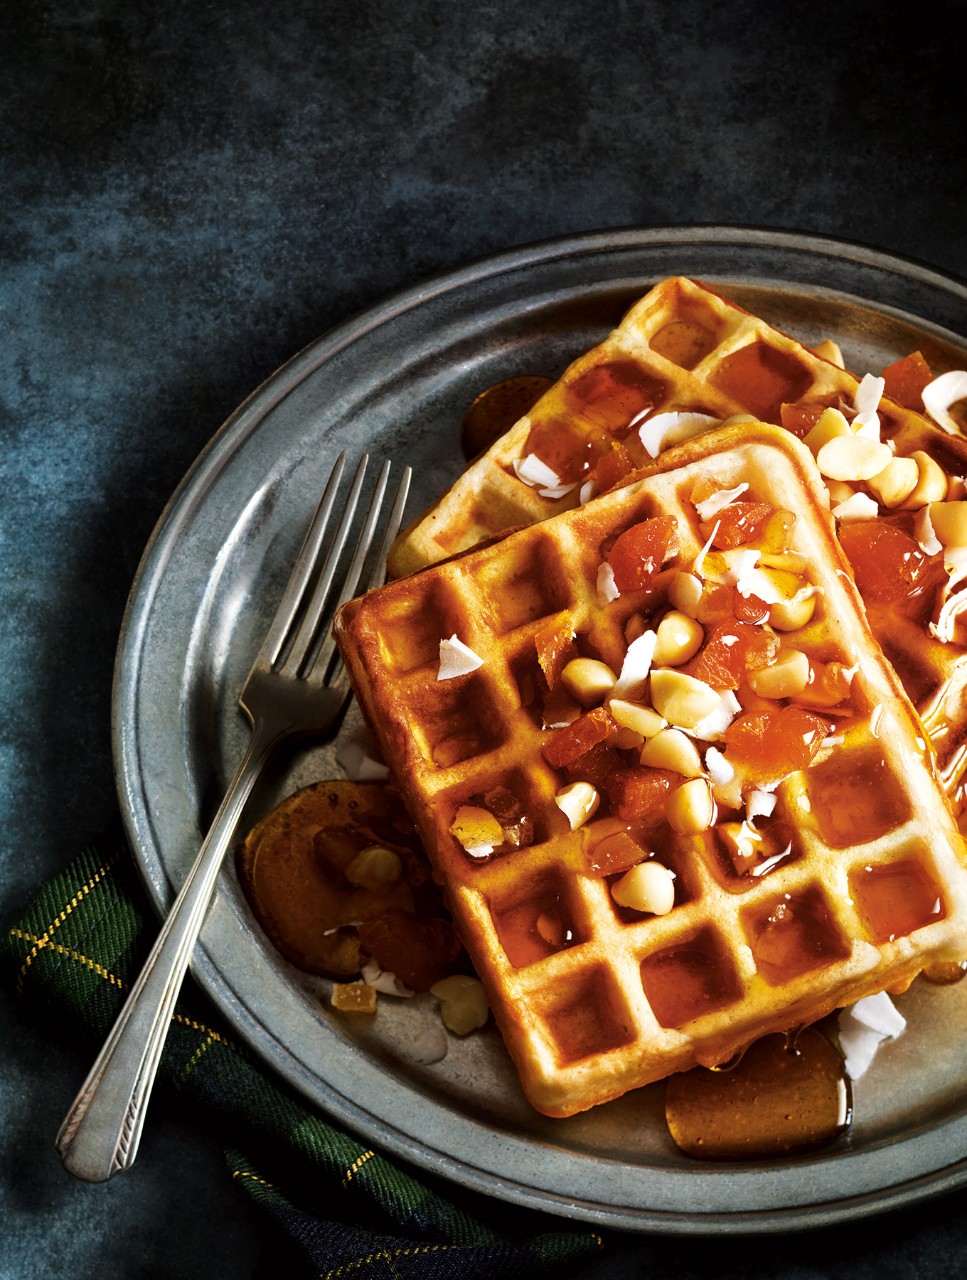 Maple Syrup, Macadamia Nut & Apricot-Topped Waffles